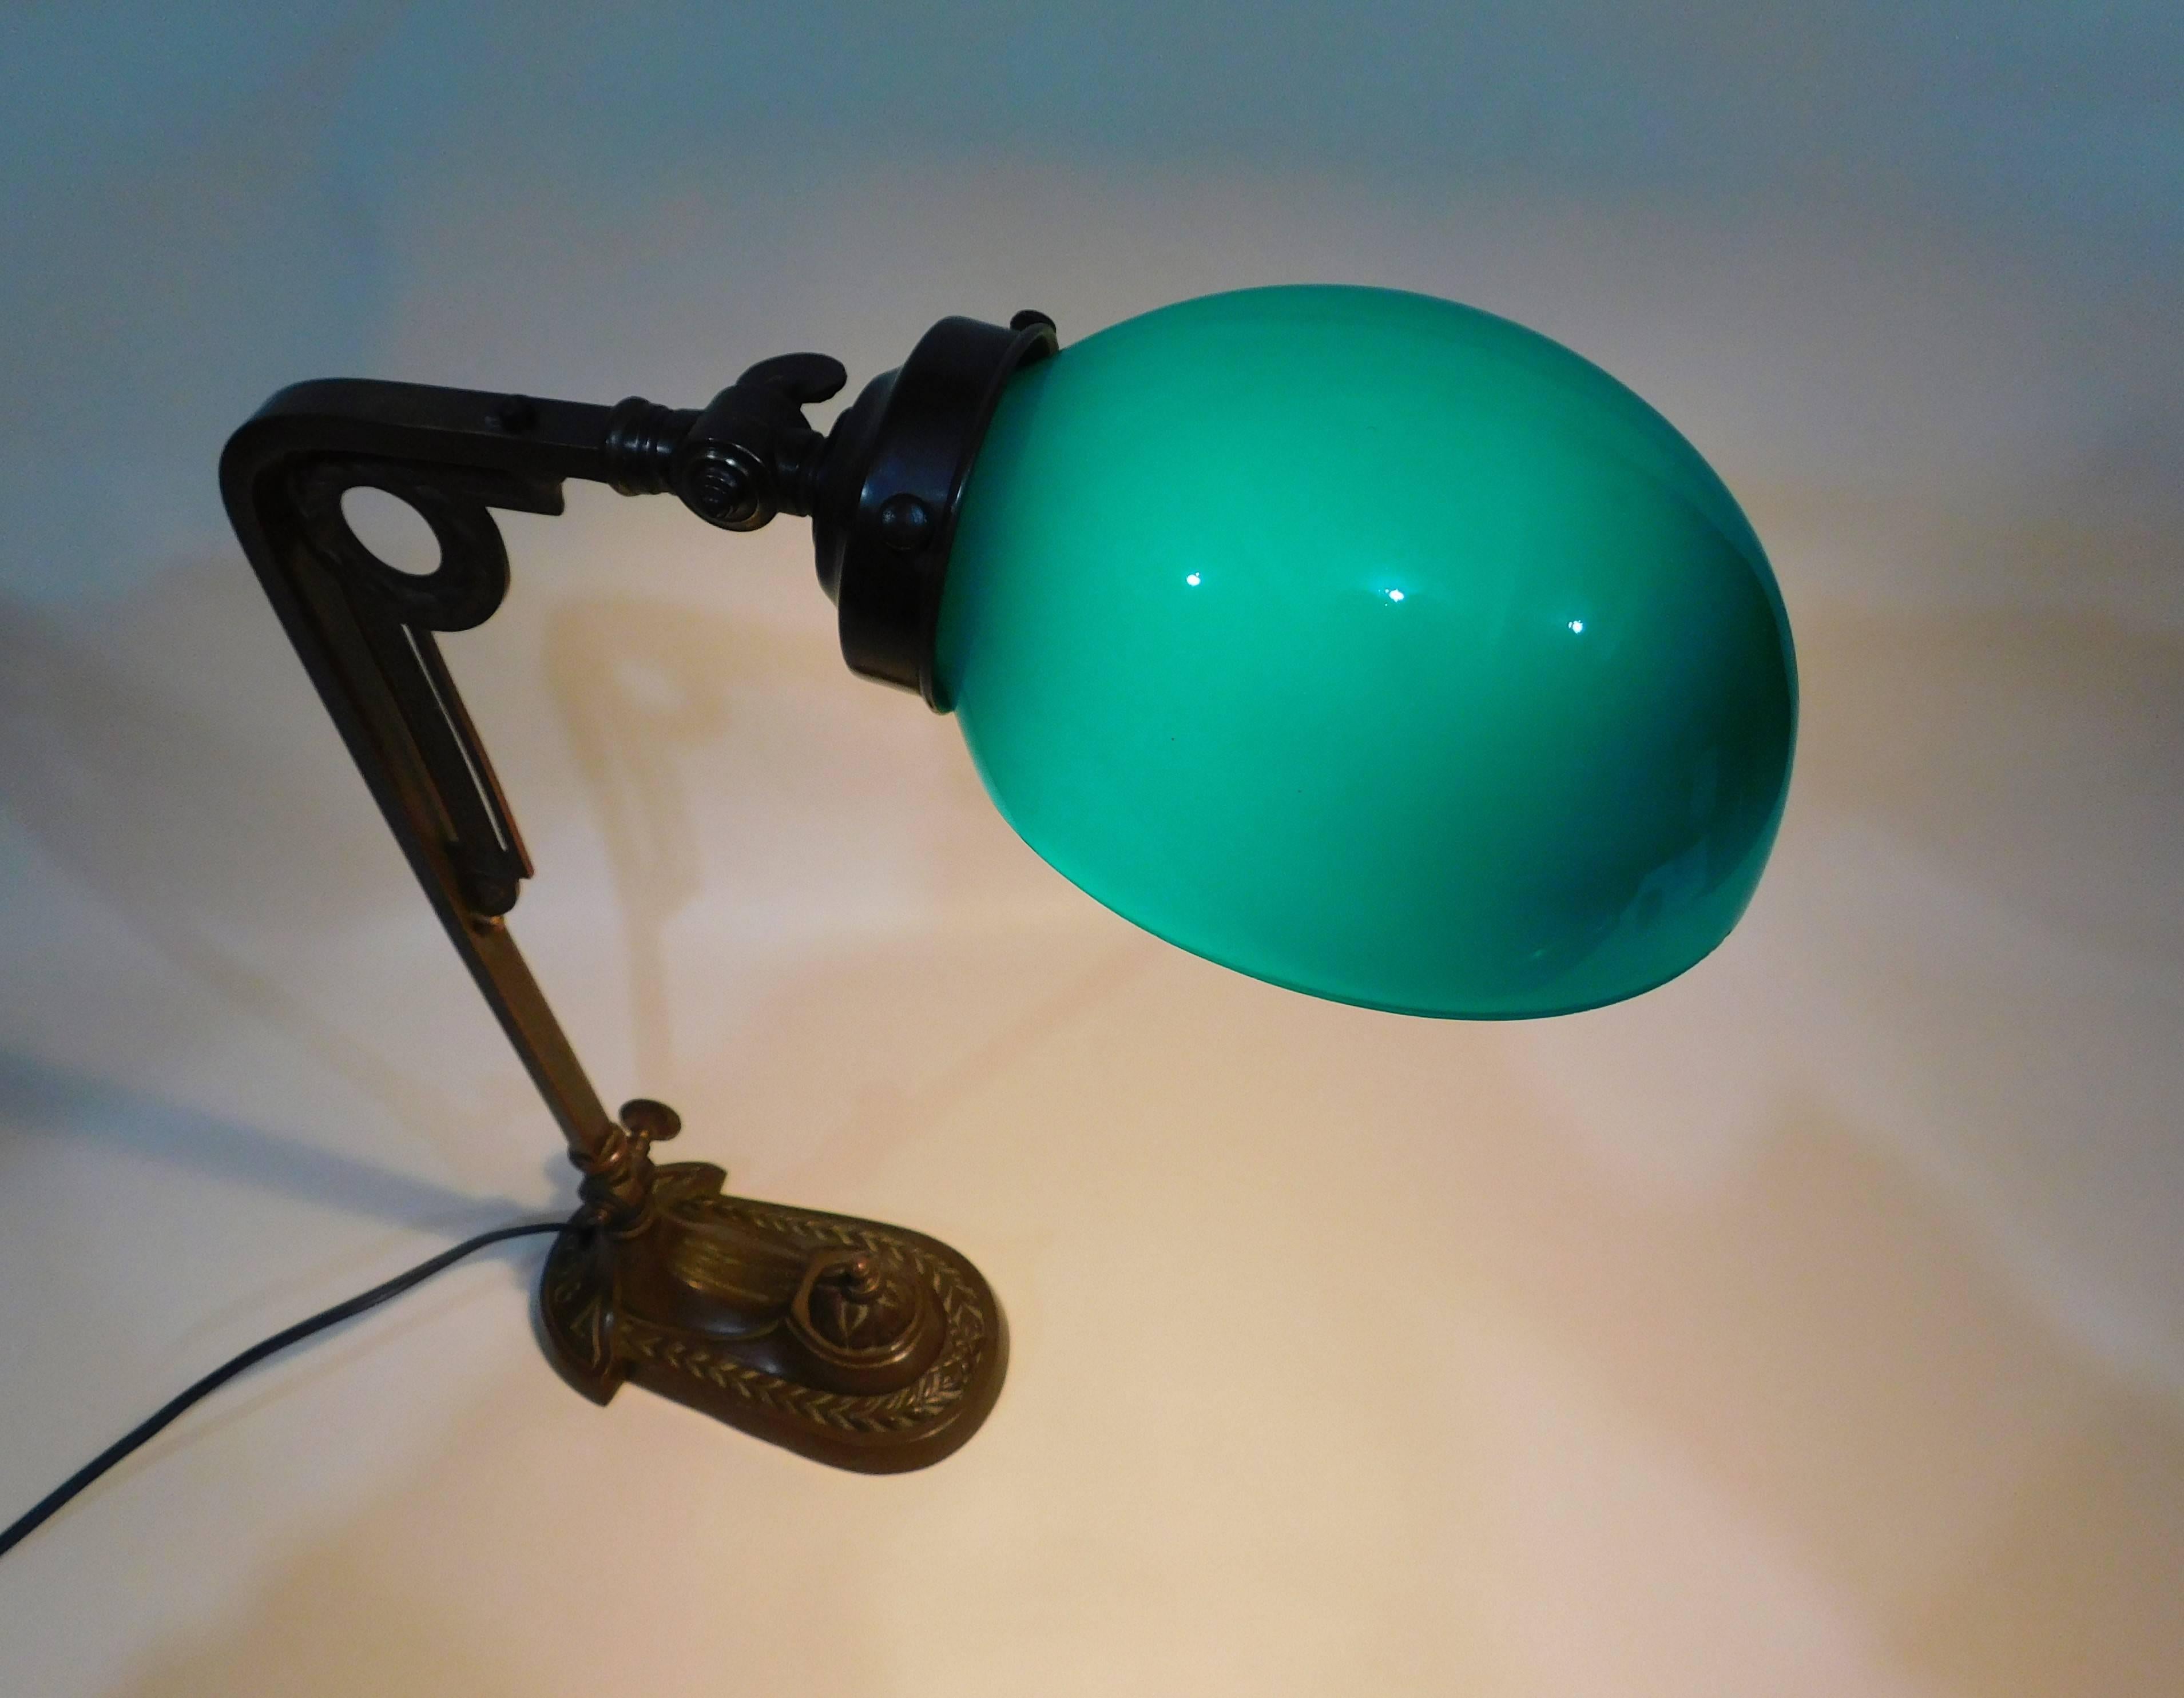 Art Deco bronze table desk lamp with original green glass shade, in excellent condition.